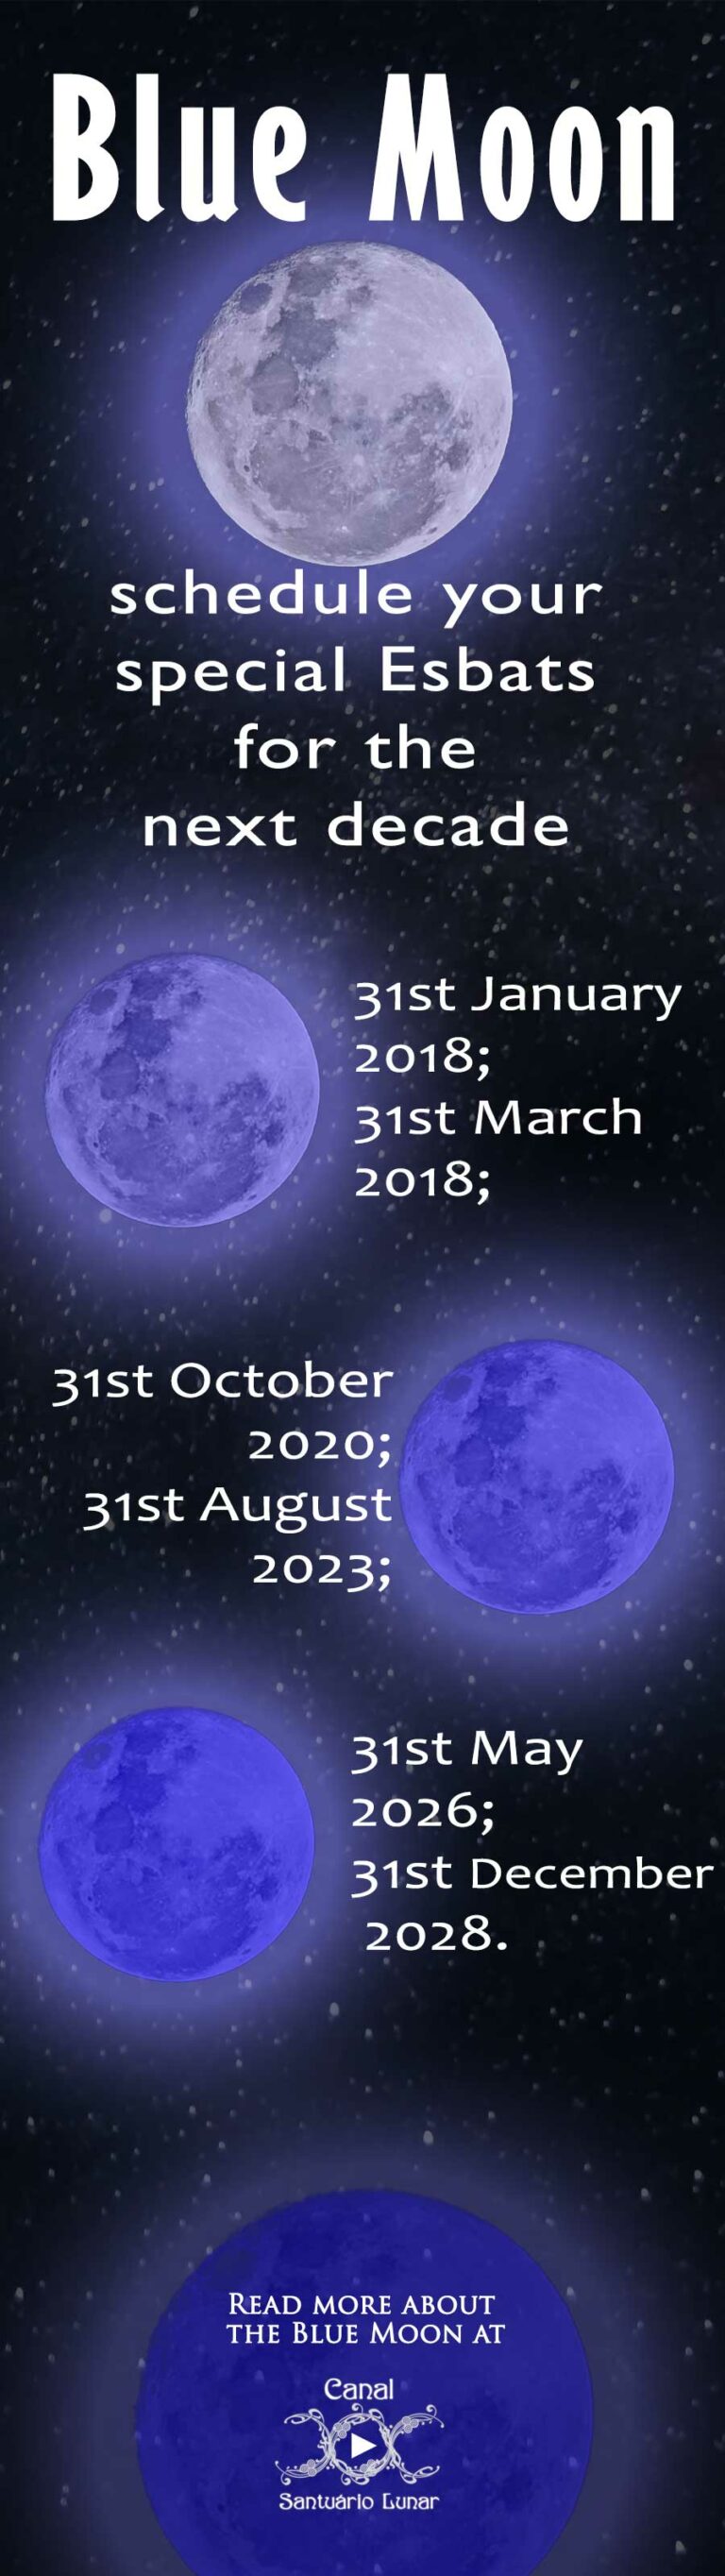 What is a Blue Moon? (+ a Calendar to schedule your special Esbats!)